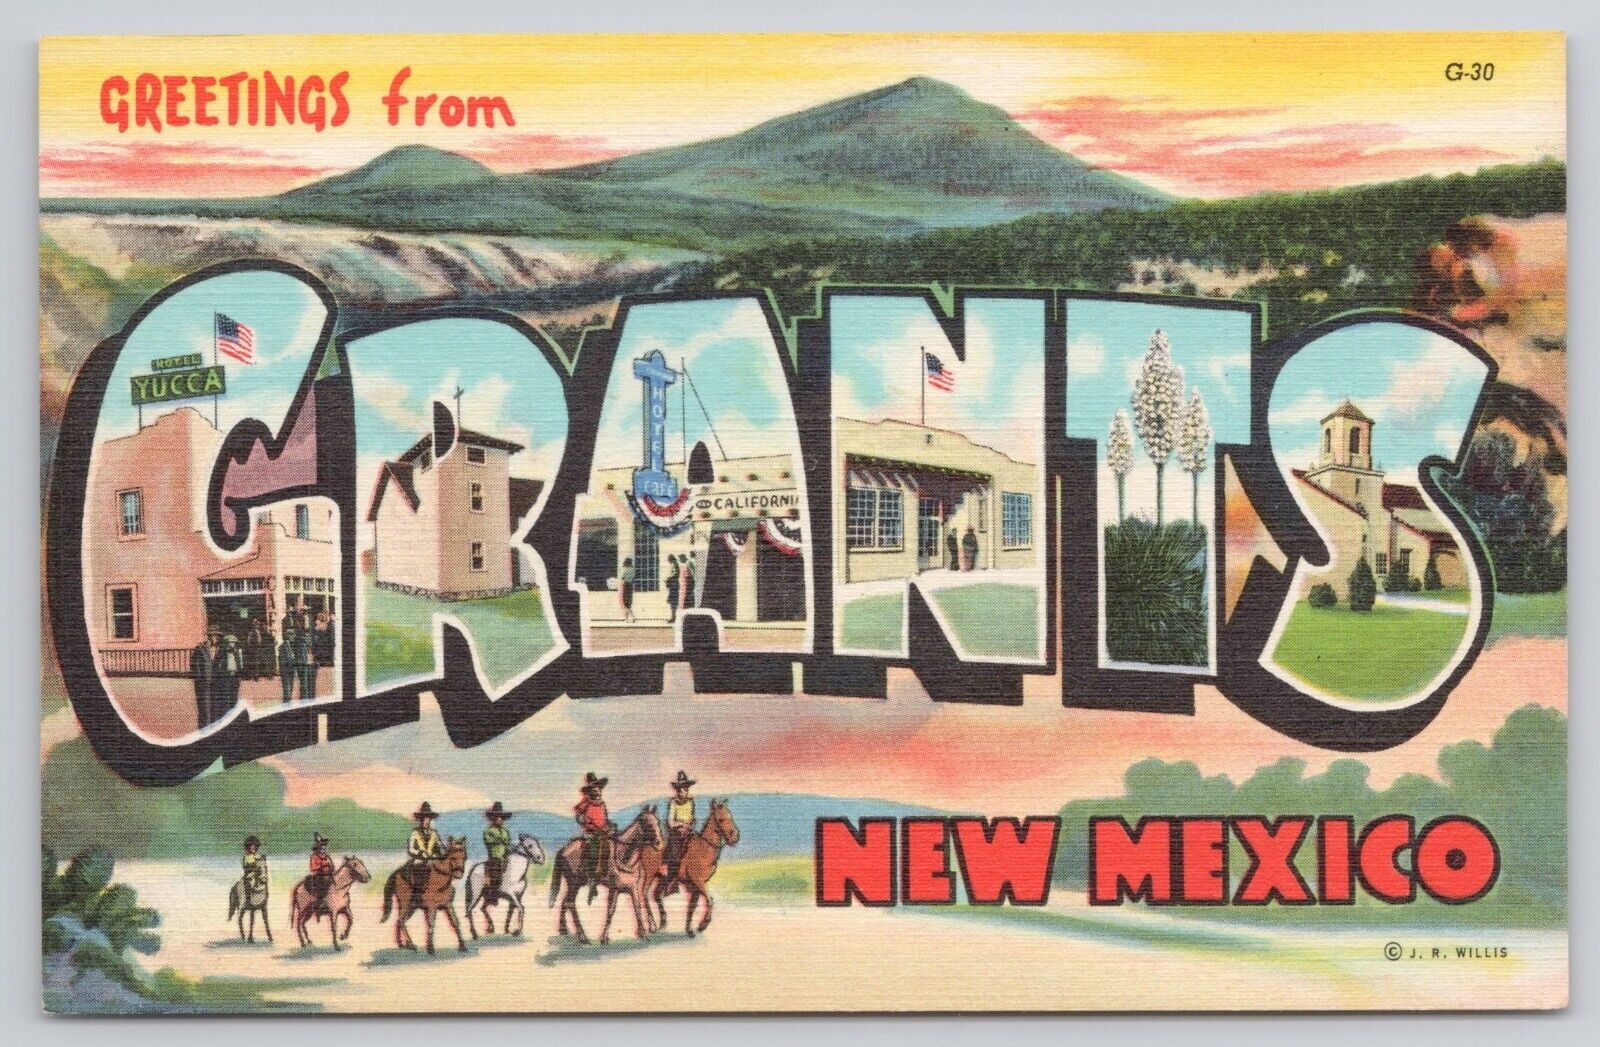 Greetings from Grants New Mexico Large Letters Old Pony Express Trail Postcard